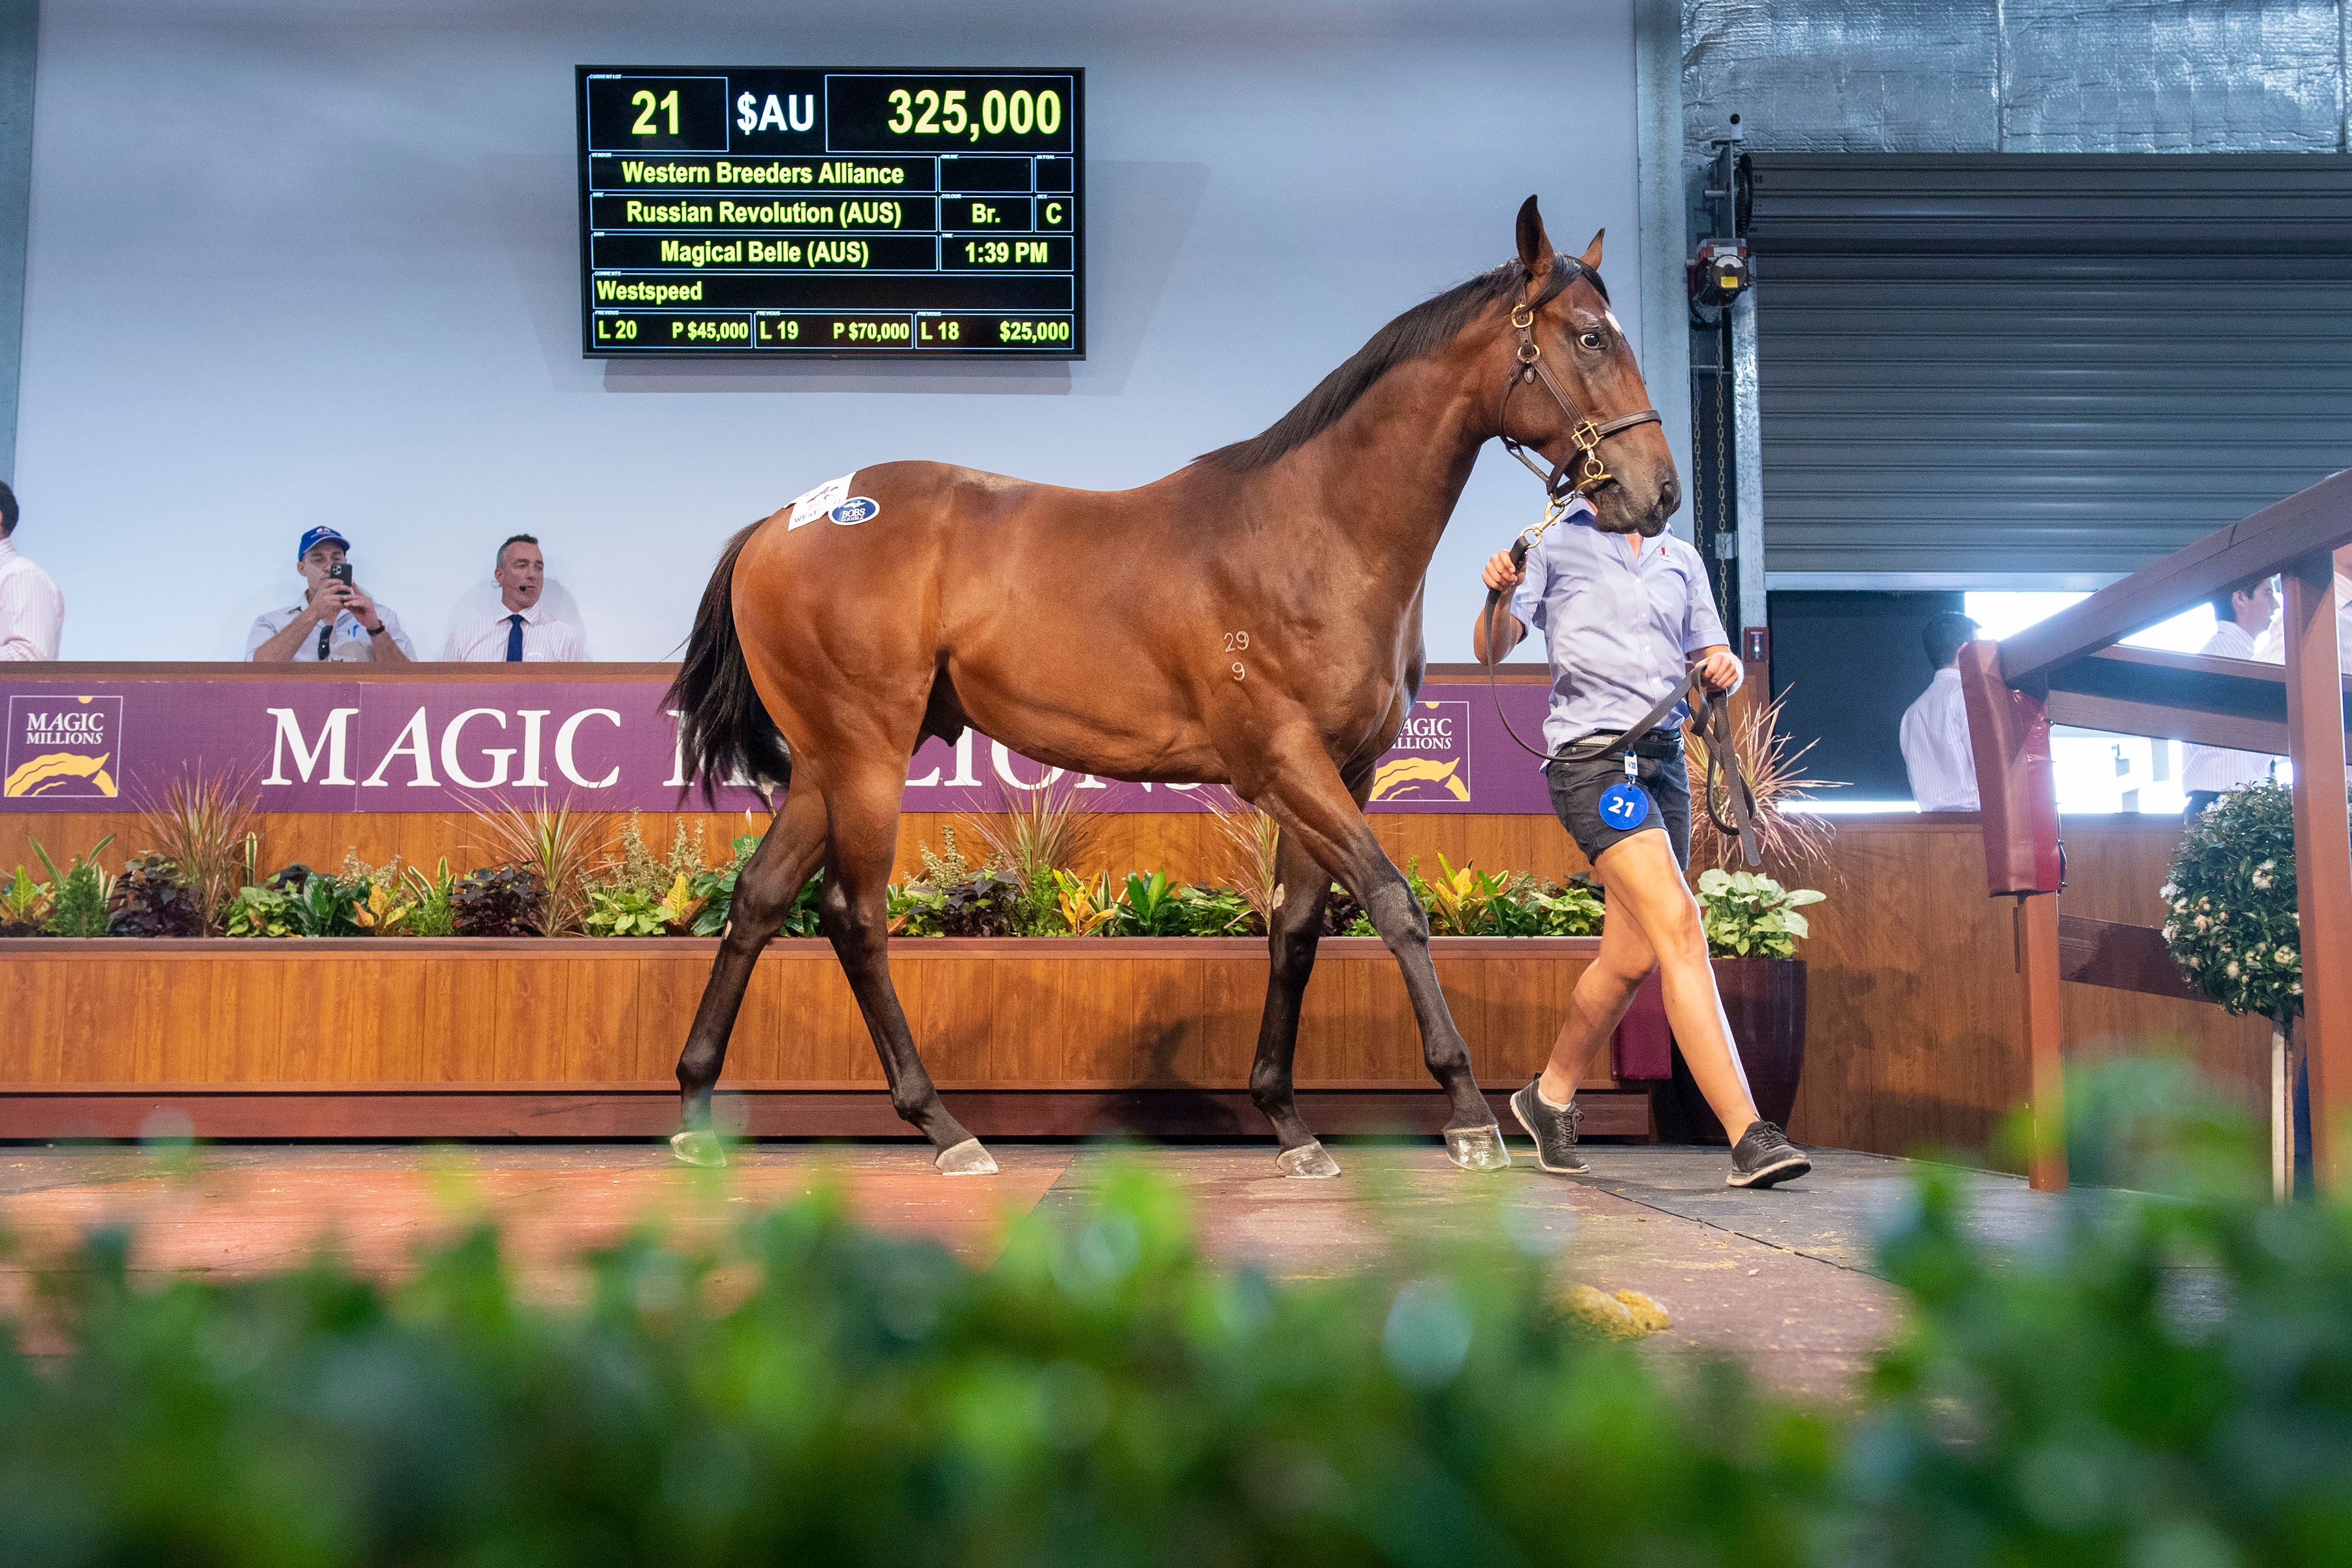 Lot 21 Russian Revolution - Magical Belle colt who sold for $325,000.